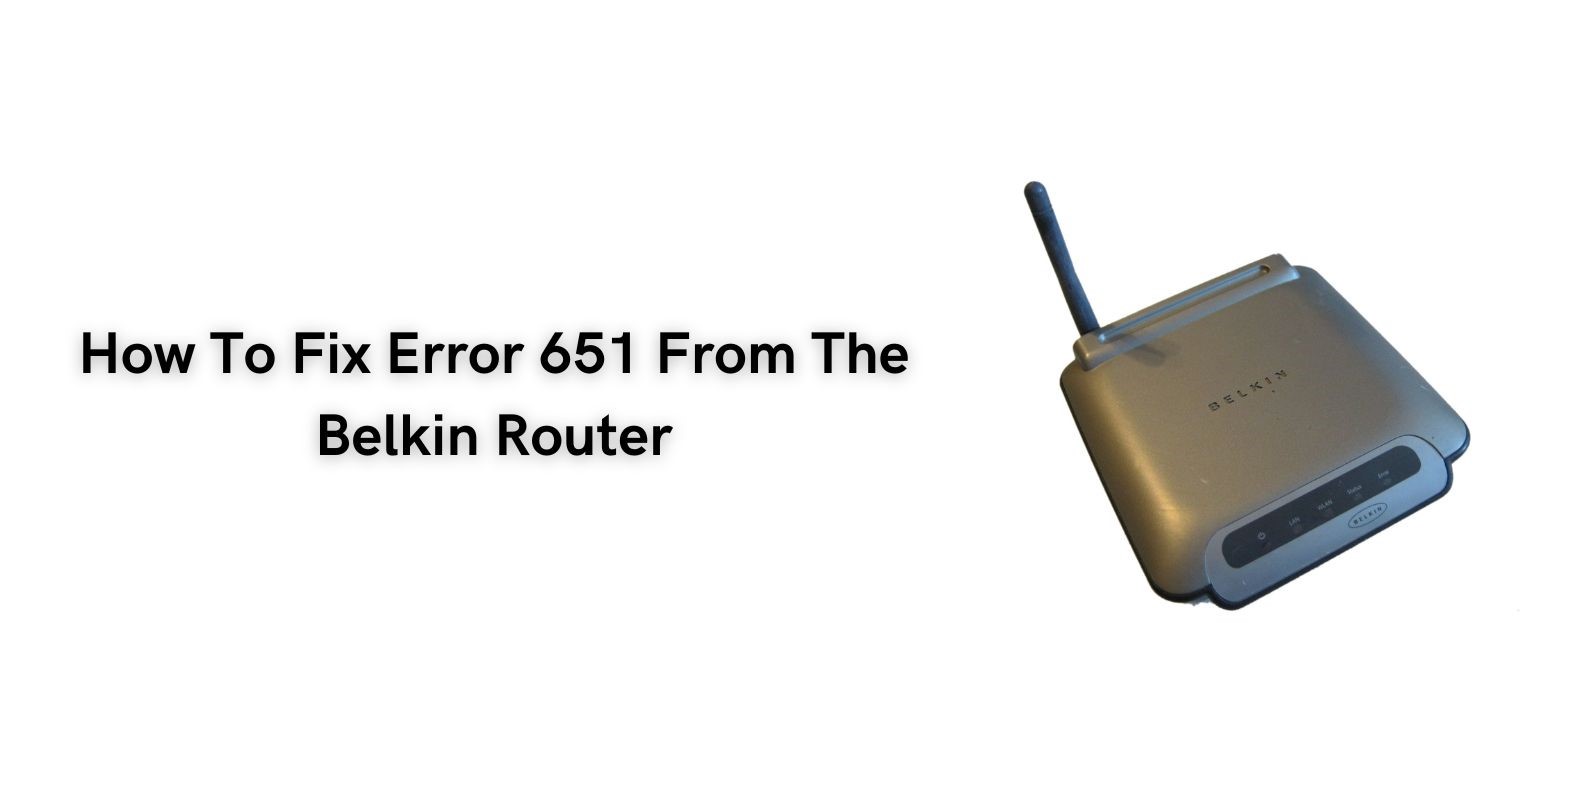 How To Fix Error 651 From The Belkin Router